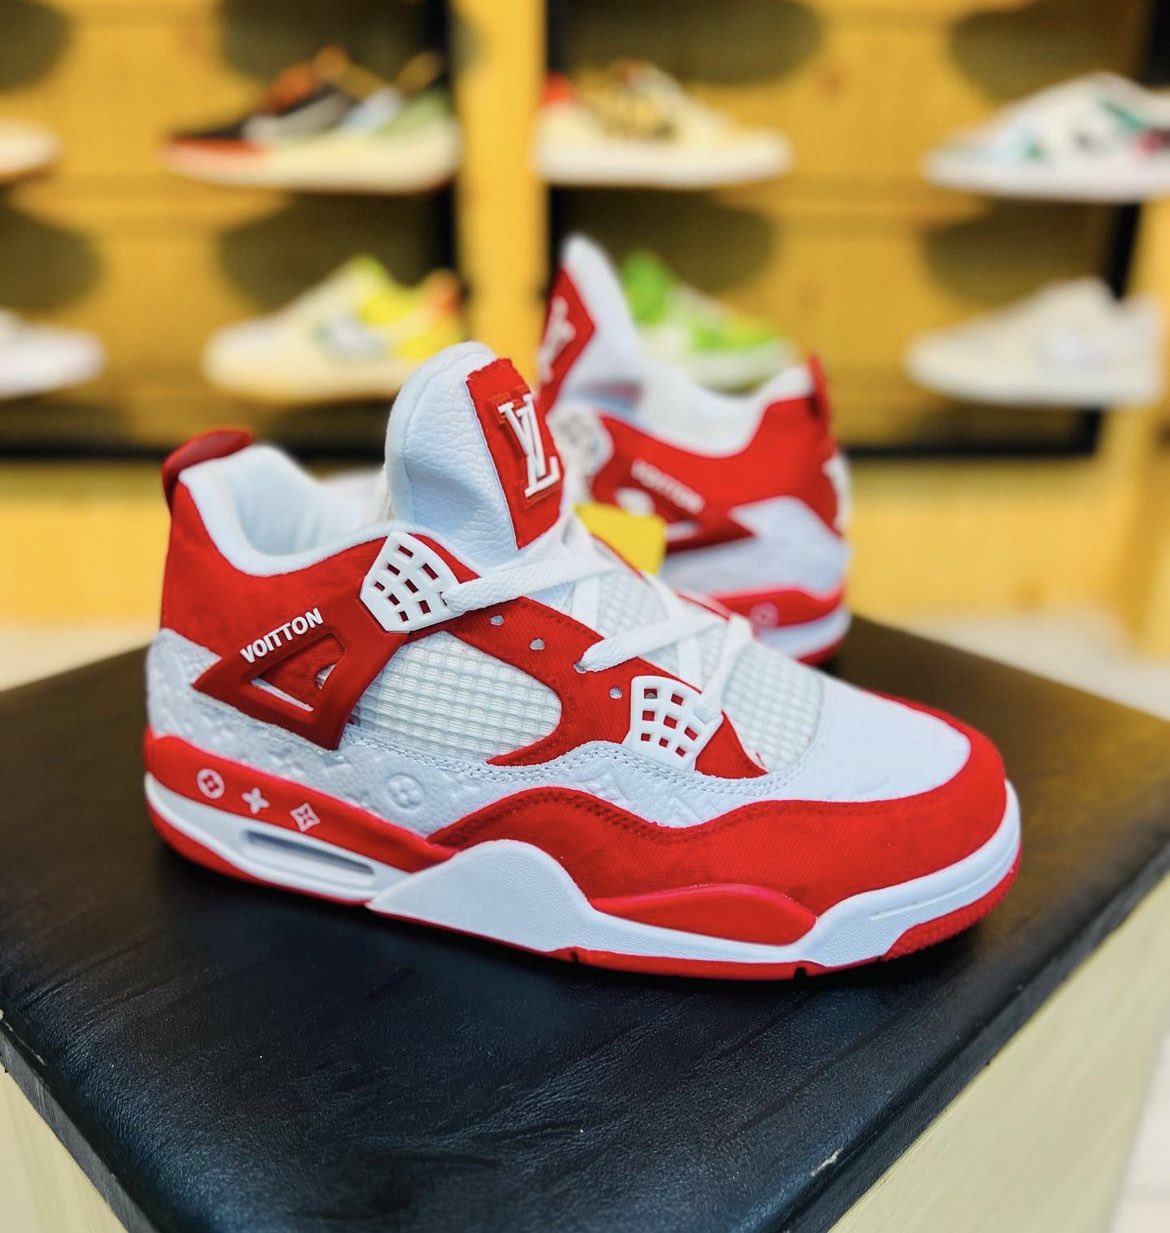 Raudha Bruhan on X: Air Jordan 4 “Louis Vuitton” Red Contact @RaudhaBruhan  or 0781628981 Price: 170,000 Negotiable😎 Walk your path in style😎 Please  support a young hustler😊  / X